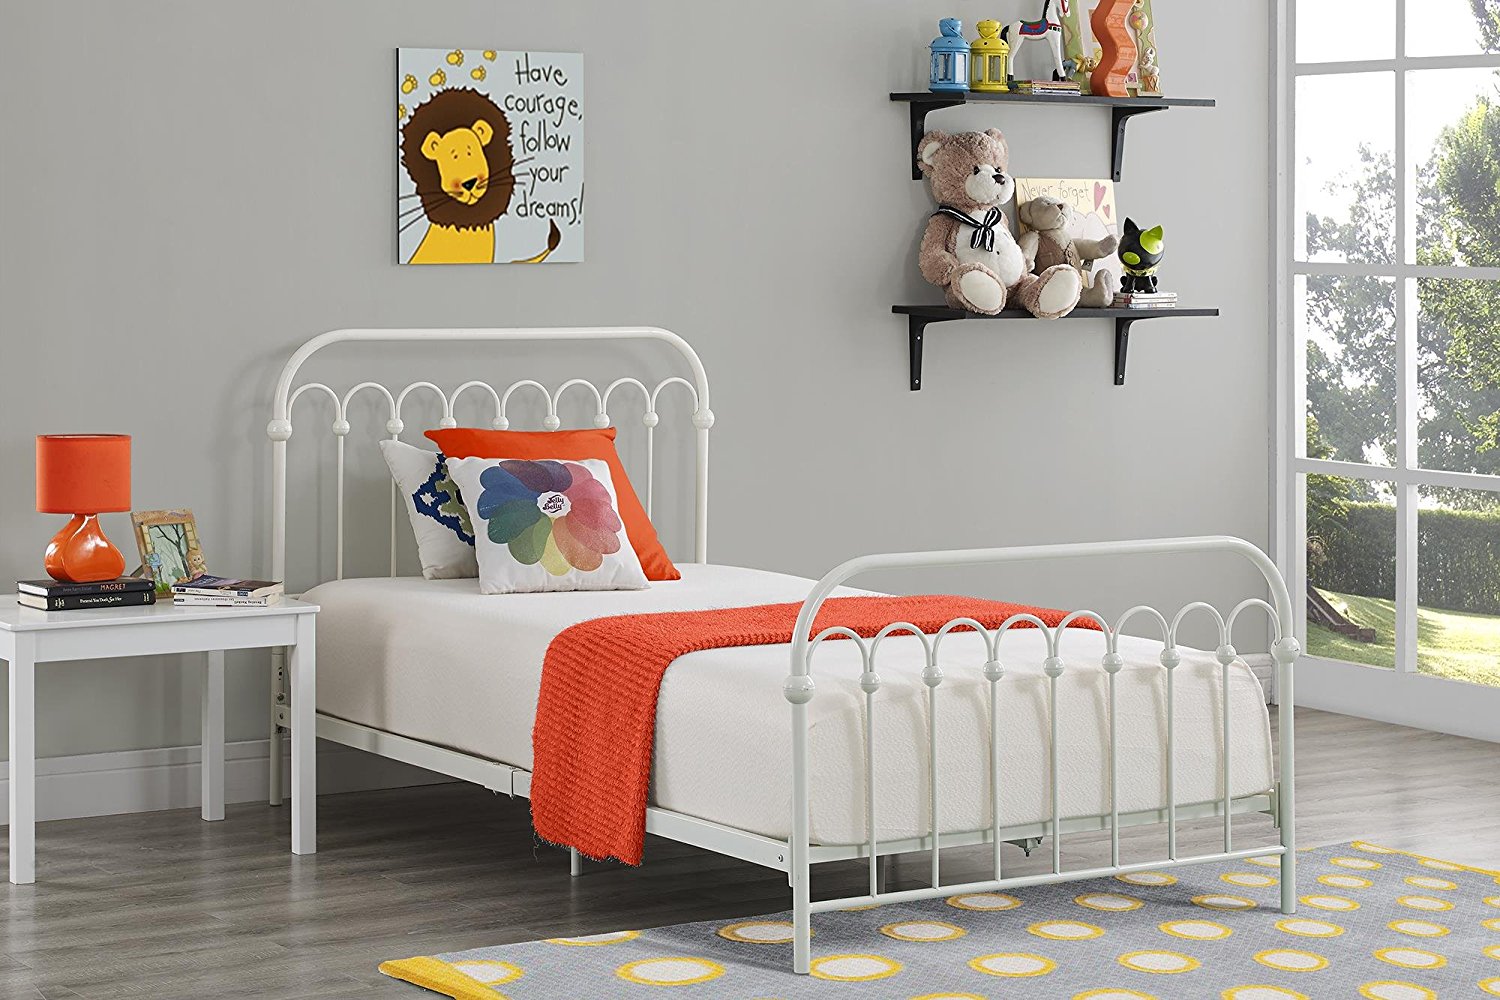 affordable bunk beds with mattresses